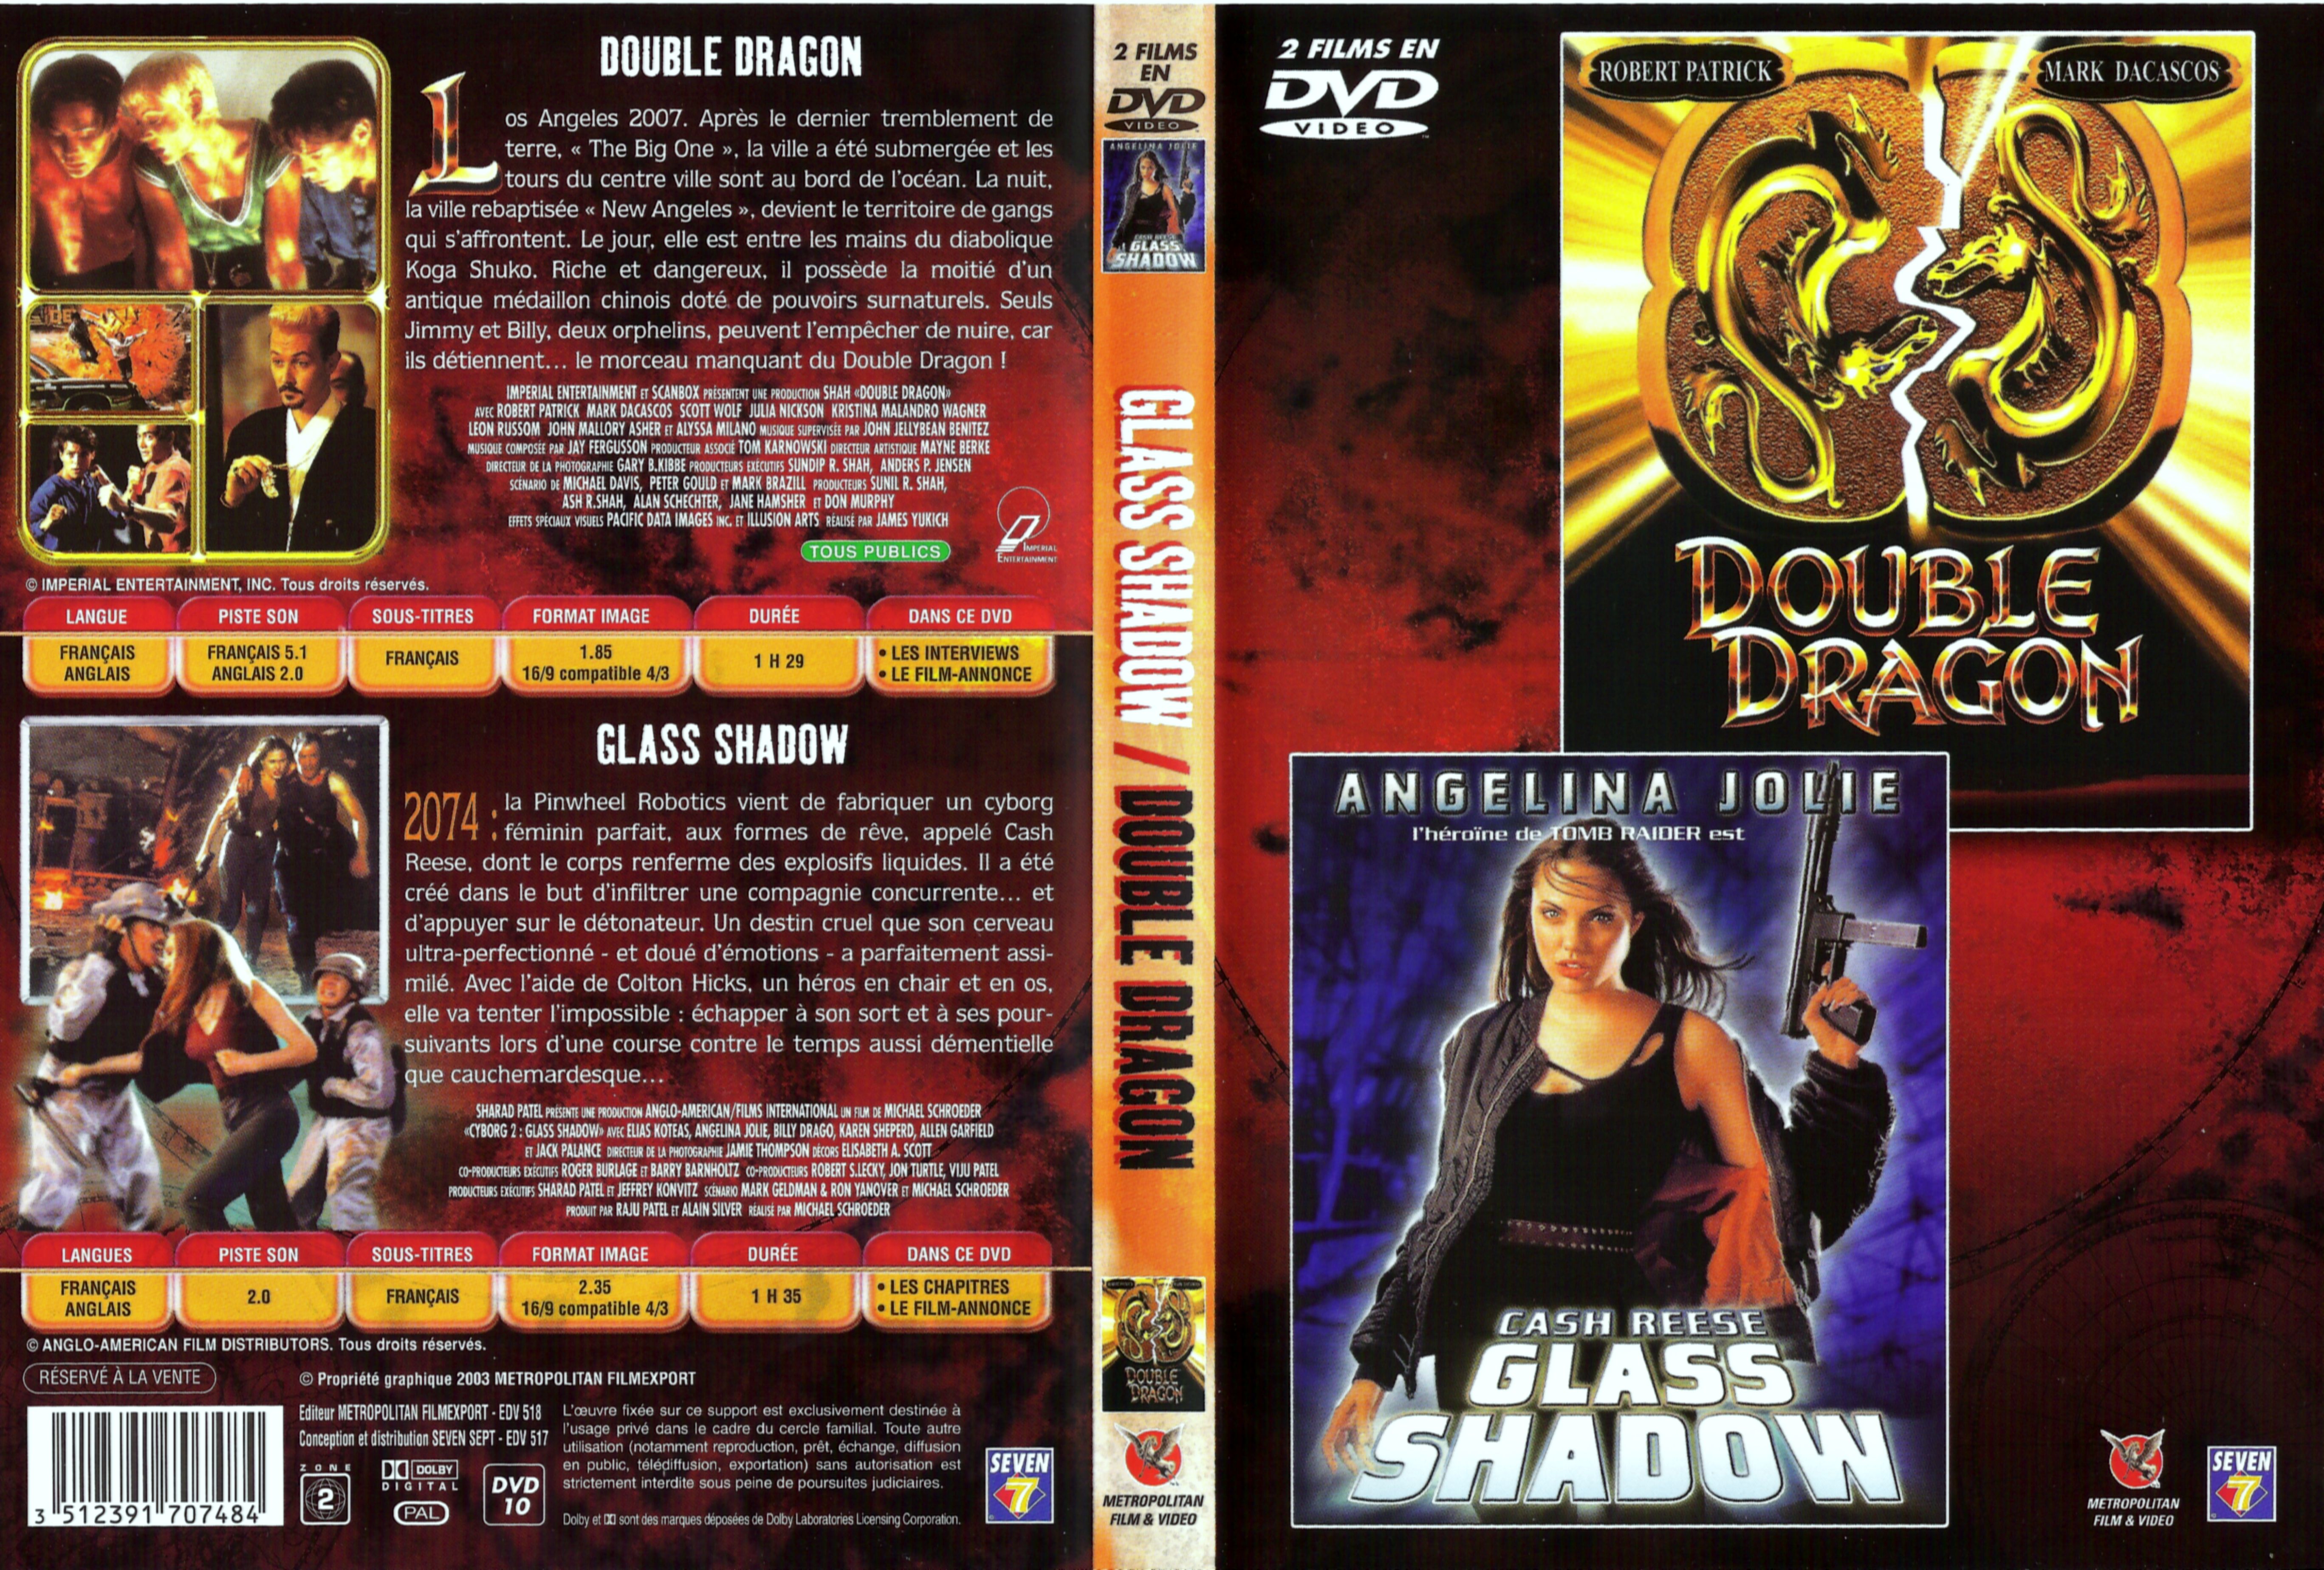 Jaquette DVD Glass shadow + Double dragon